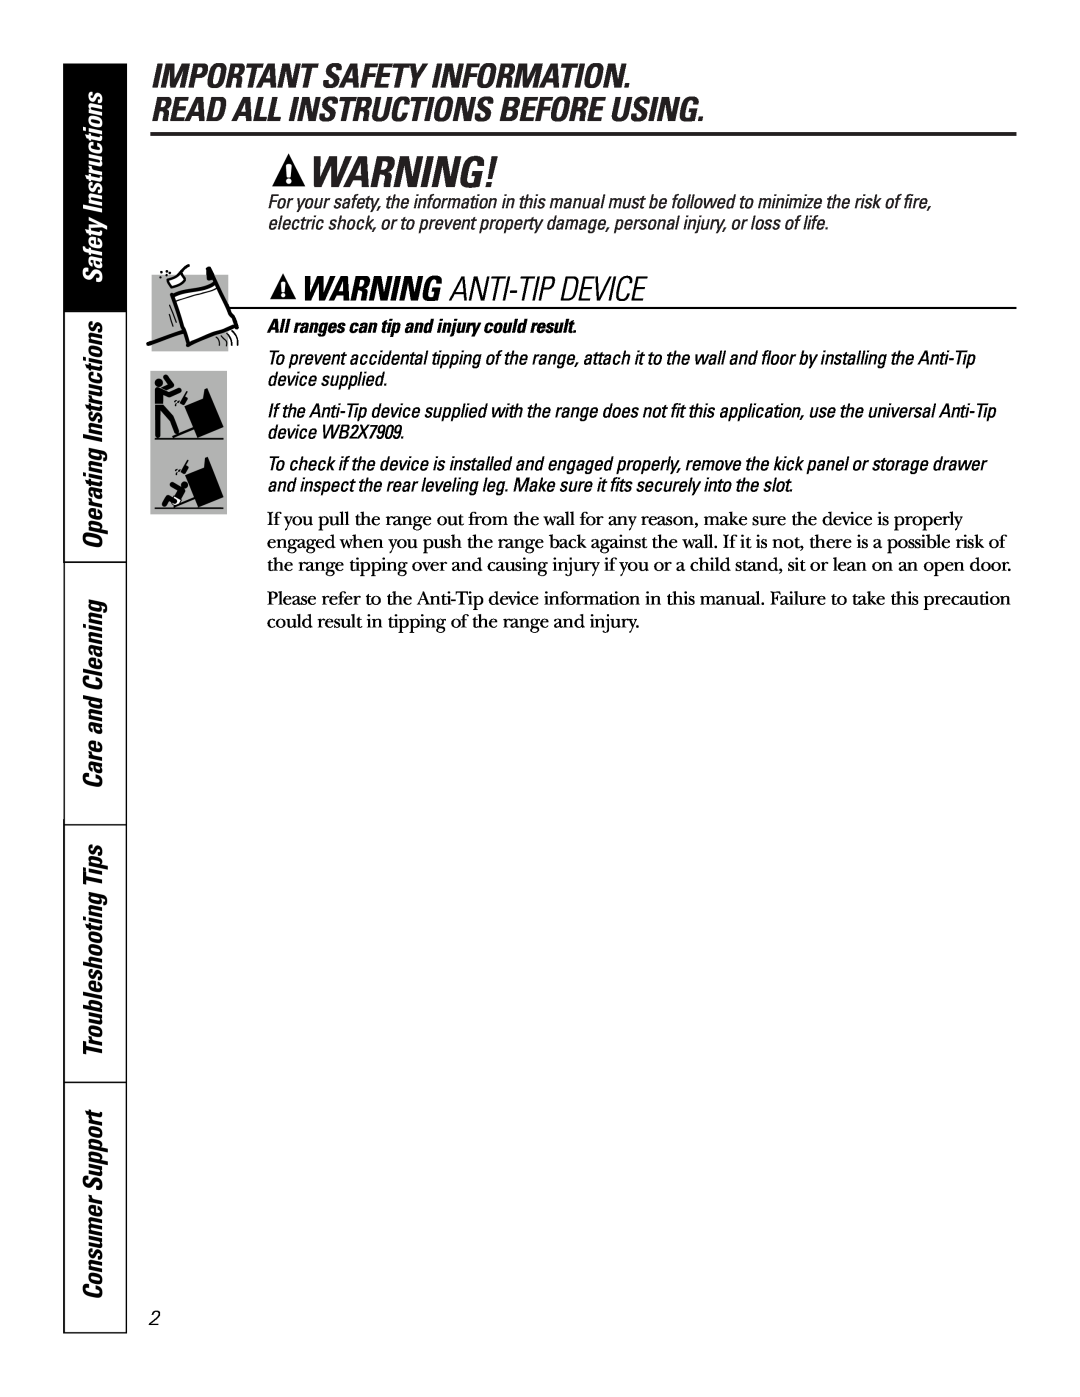 GE JBP49 owner manual Important Safety Information Read All Instructions Before Using, Warning Anti-Tip Device 